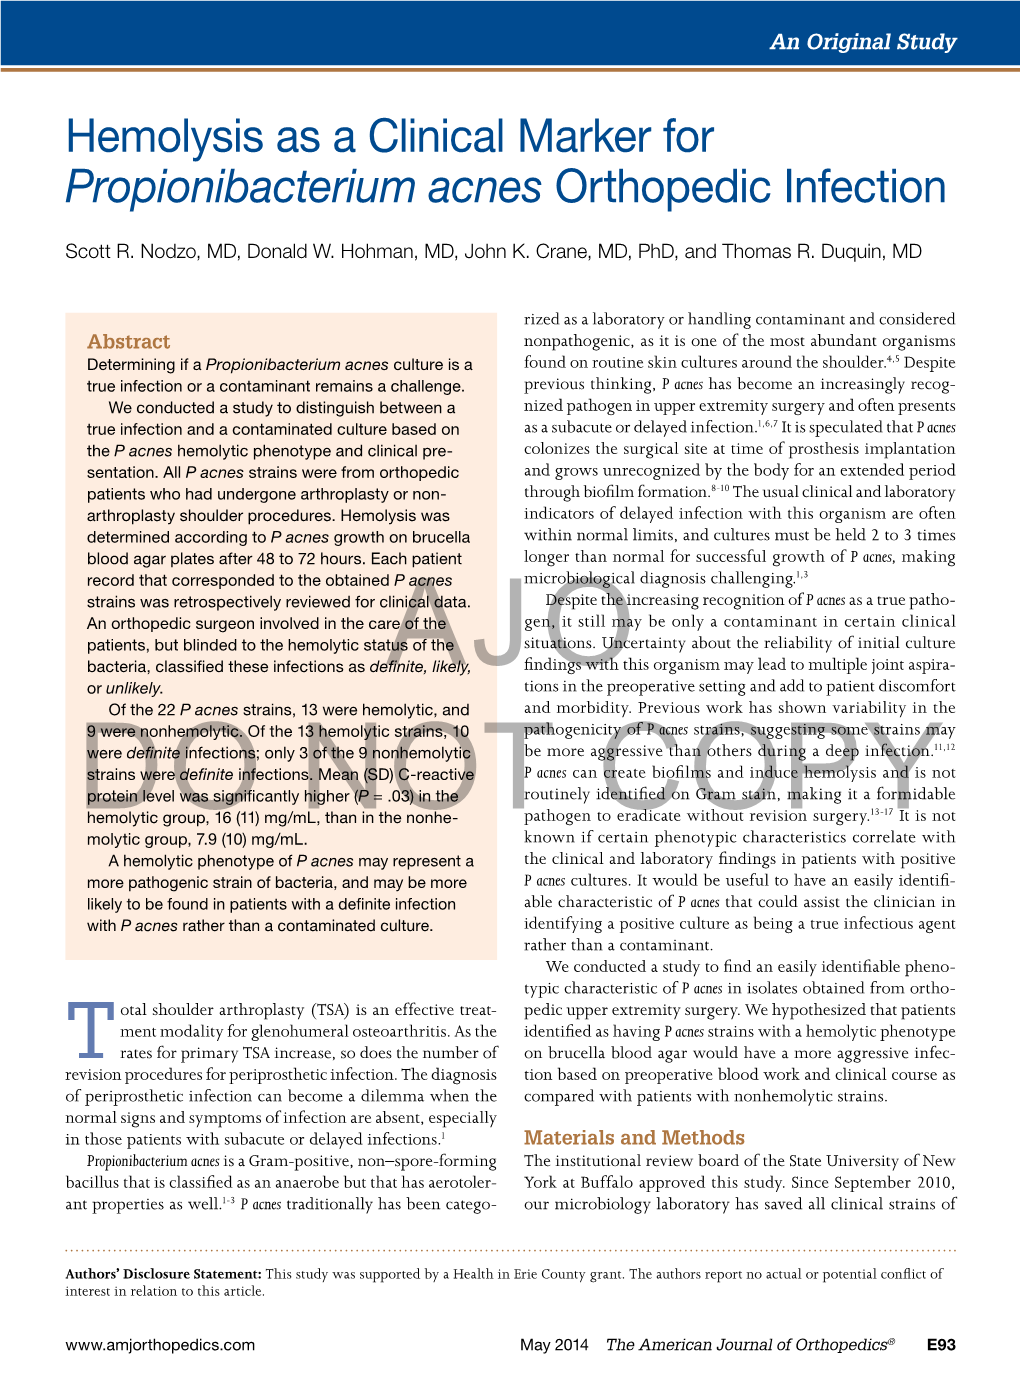 Hemolysis As a Clinical Marker for Propionibacterium Acnes Orthopedic Infection